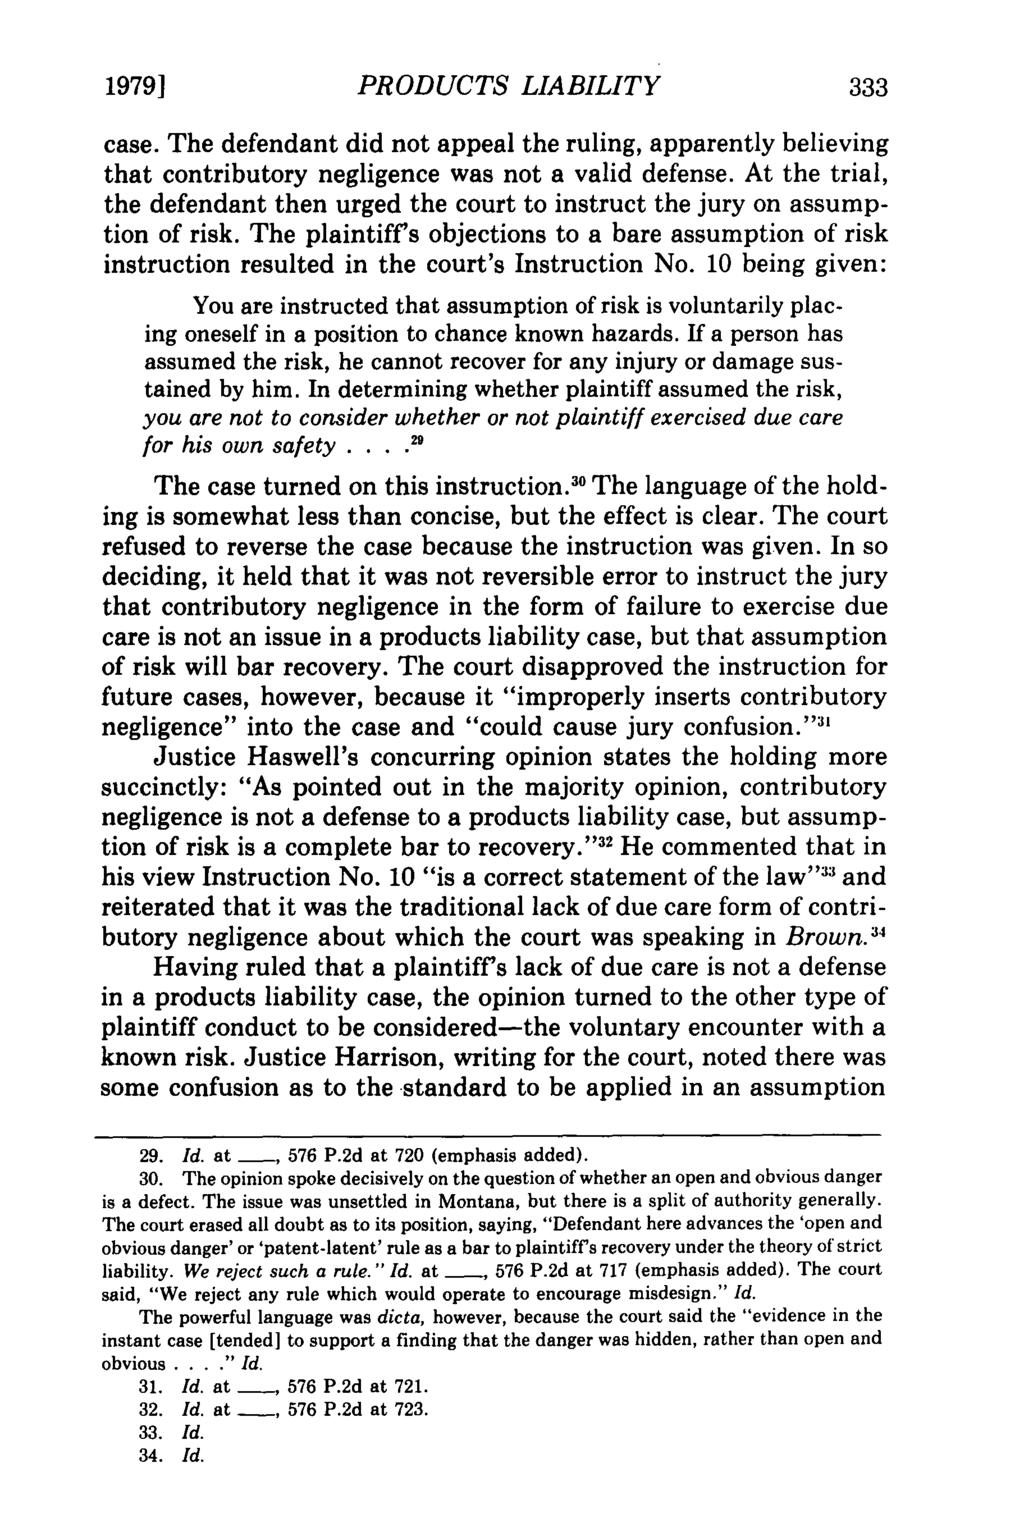 1979] Morrison: Products Liability in Montana: At Last a Word on Defense PRODUCTS LIABILITY case.